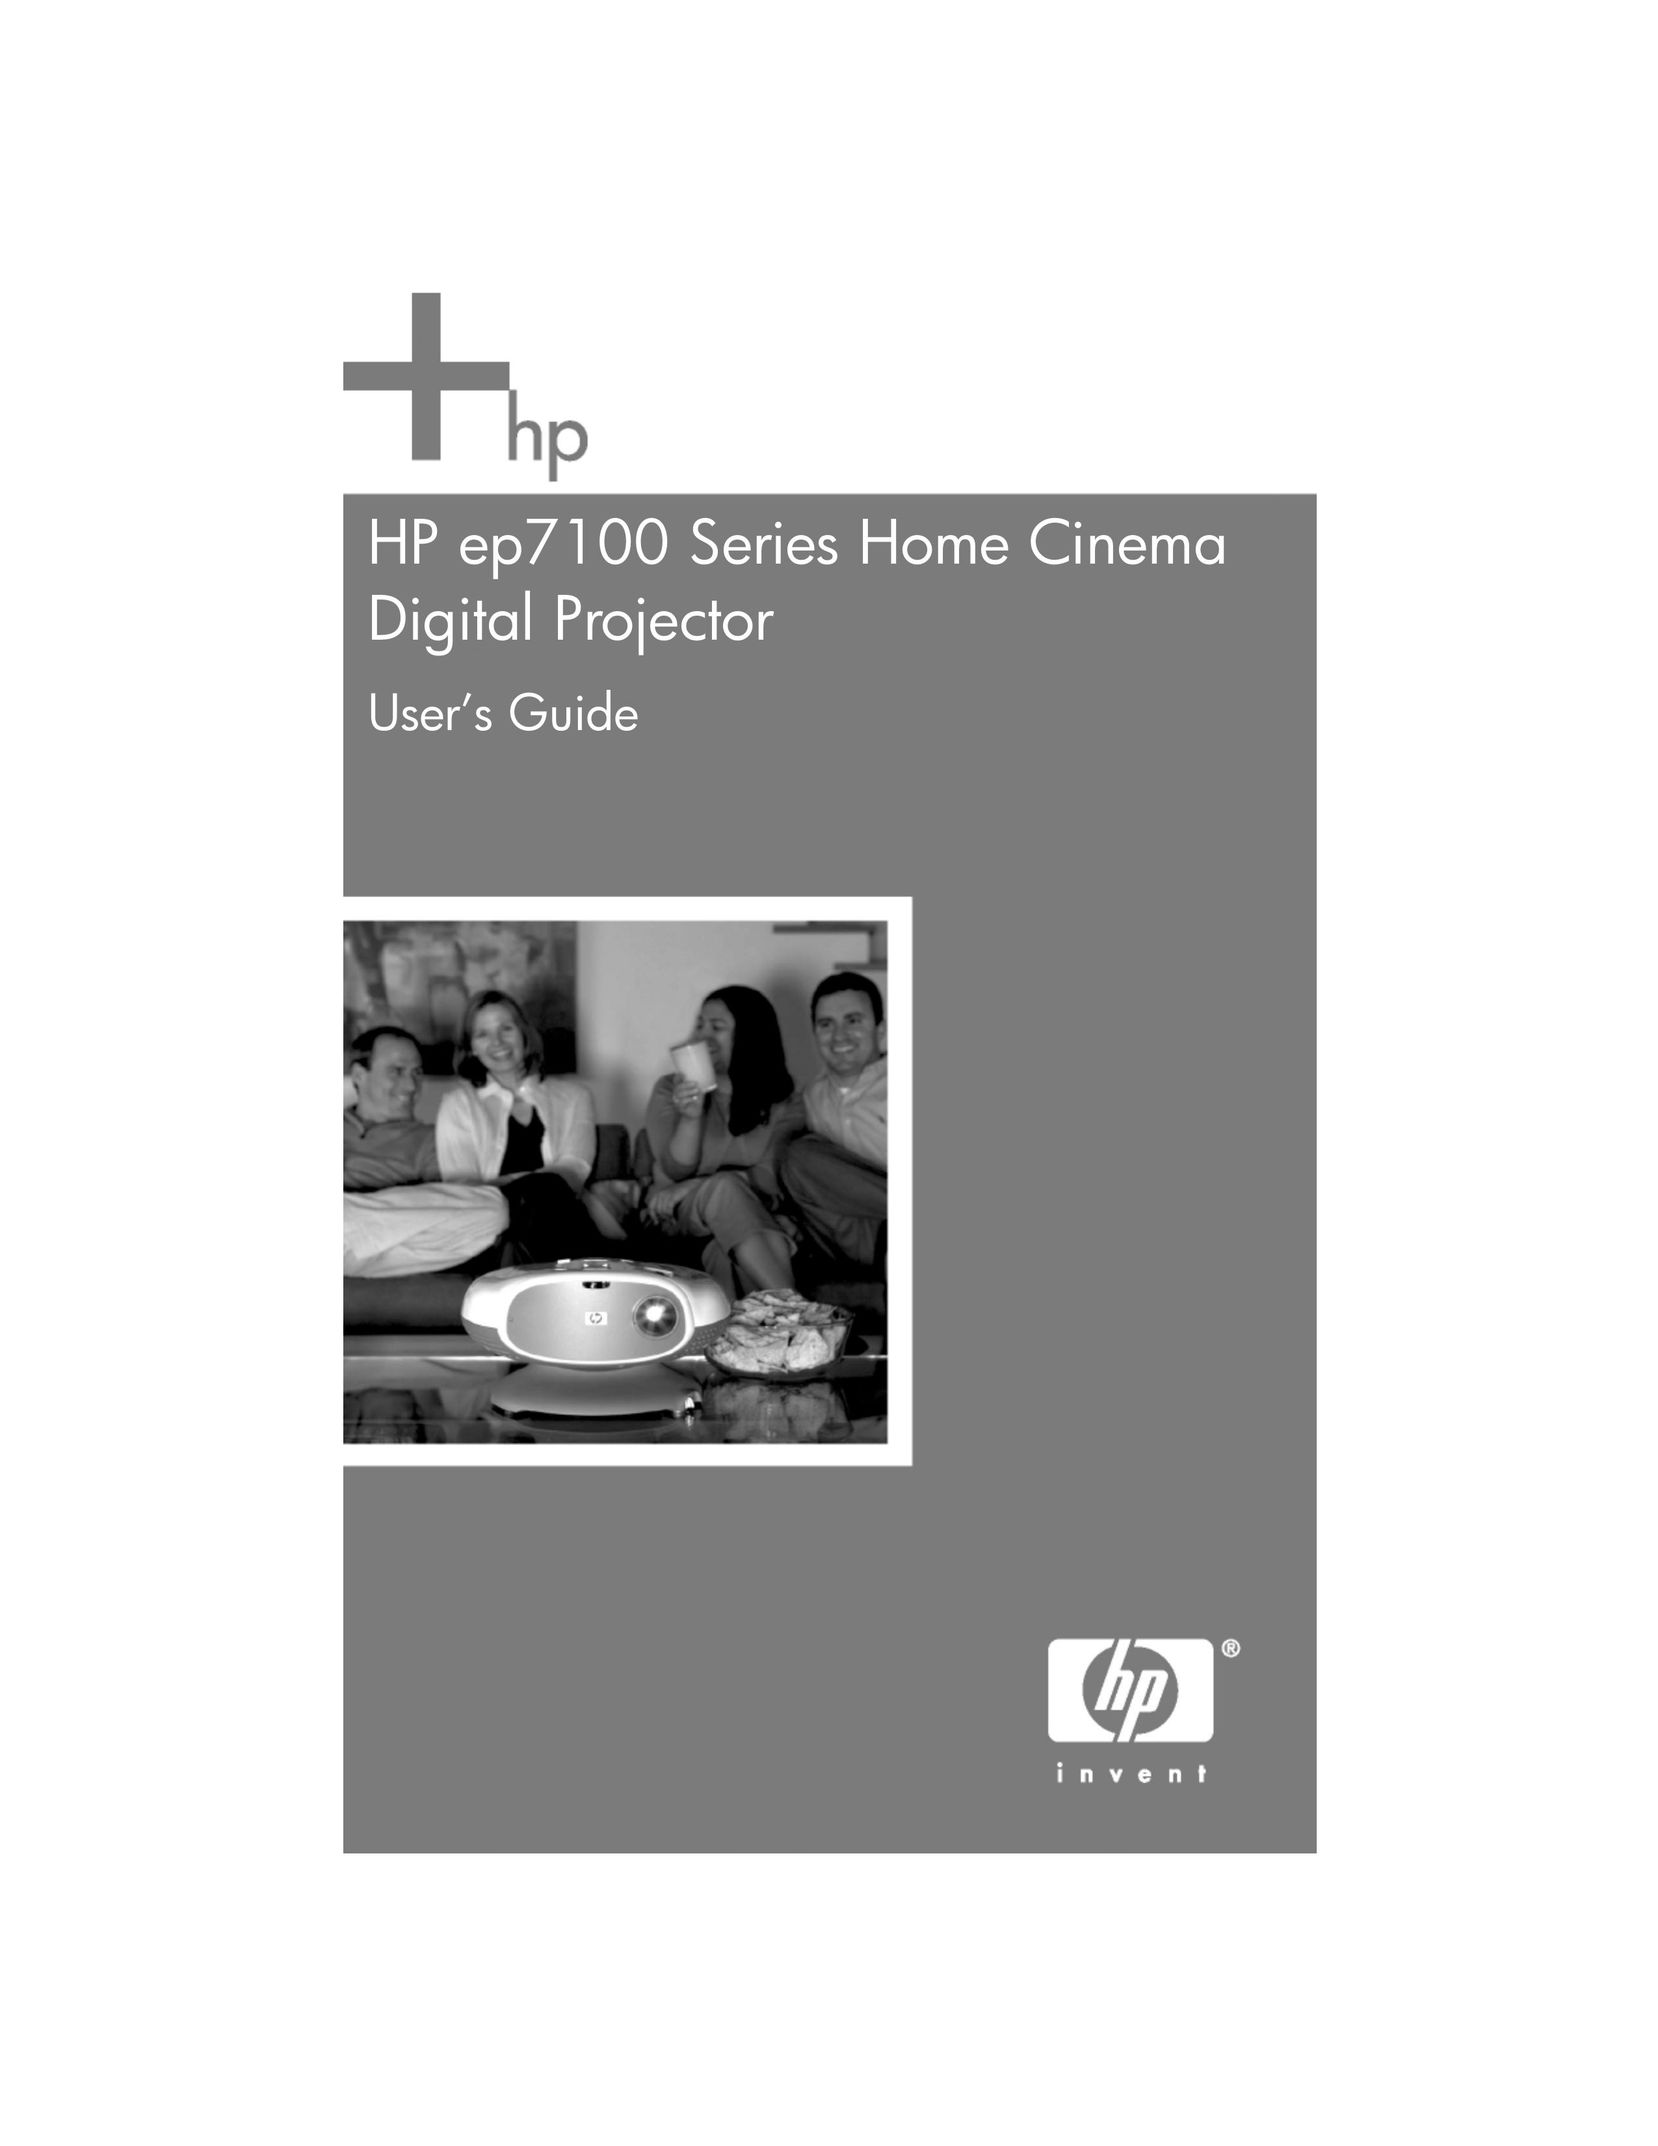 HP (Hewlett-Packard) ep7100 Series Projection Television User Manual